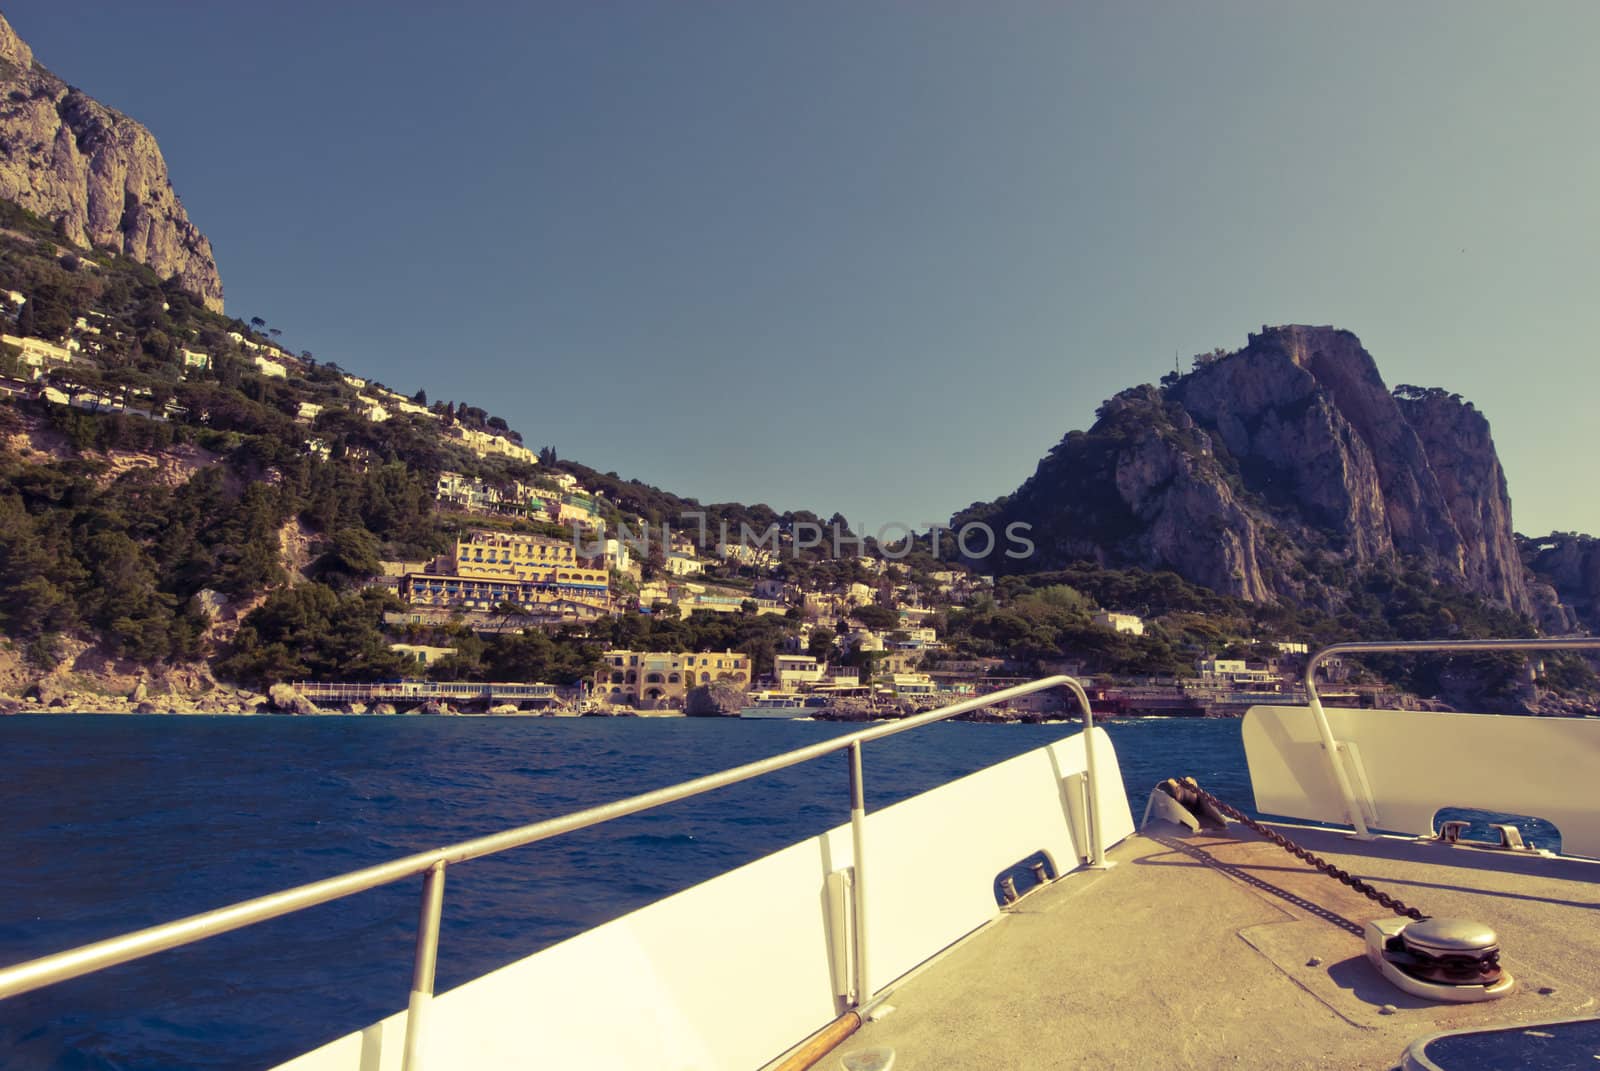 Vintage cooured bow of ship pointing at Marina Piccolo, Capri Italy